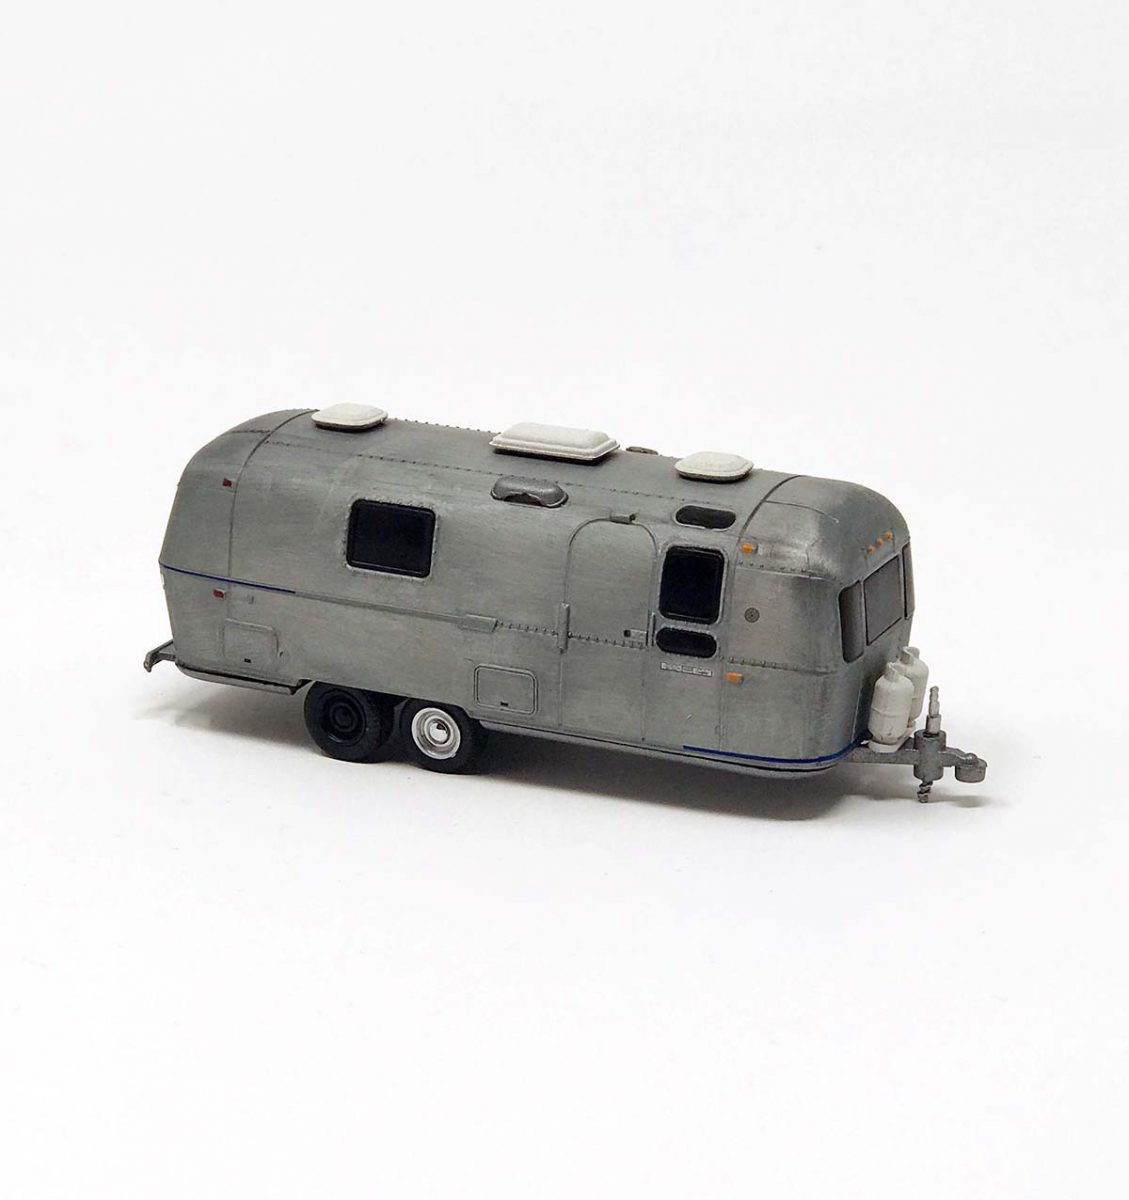 Airstream Land Yacht Camper Travel Trailer RV w/ Awning 1:64 Scale Diecast Model 